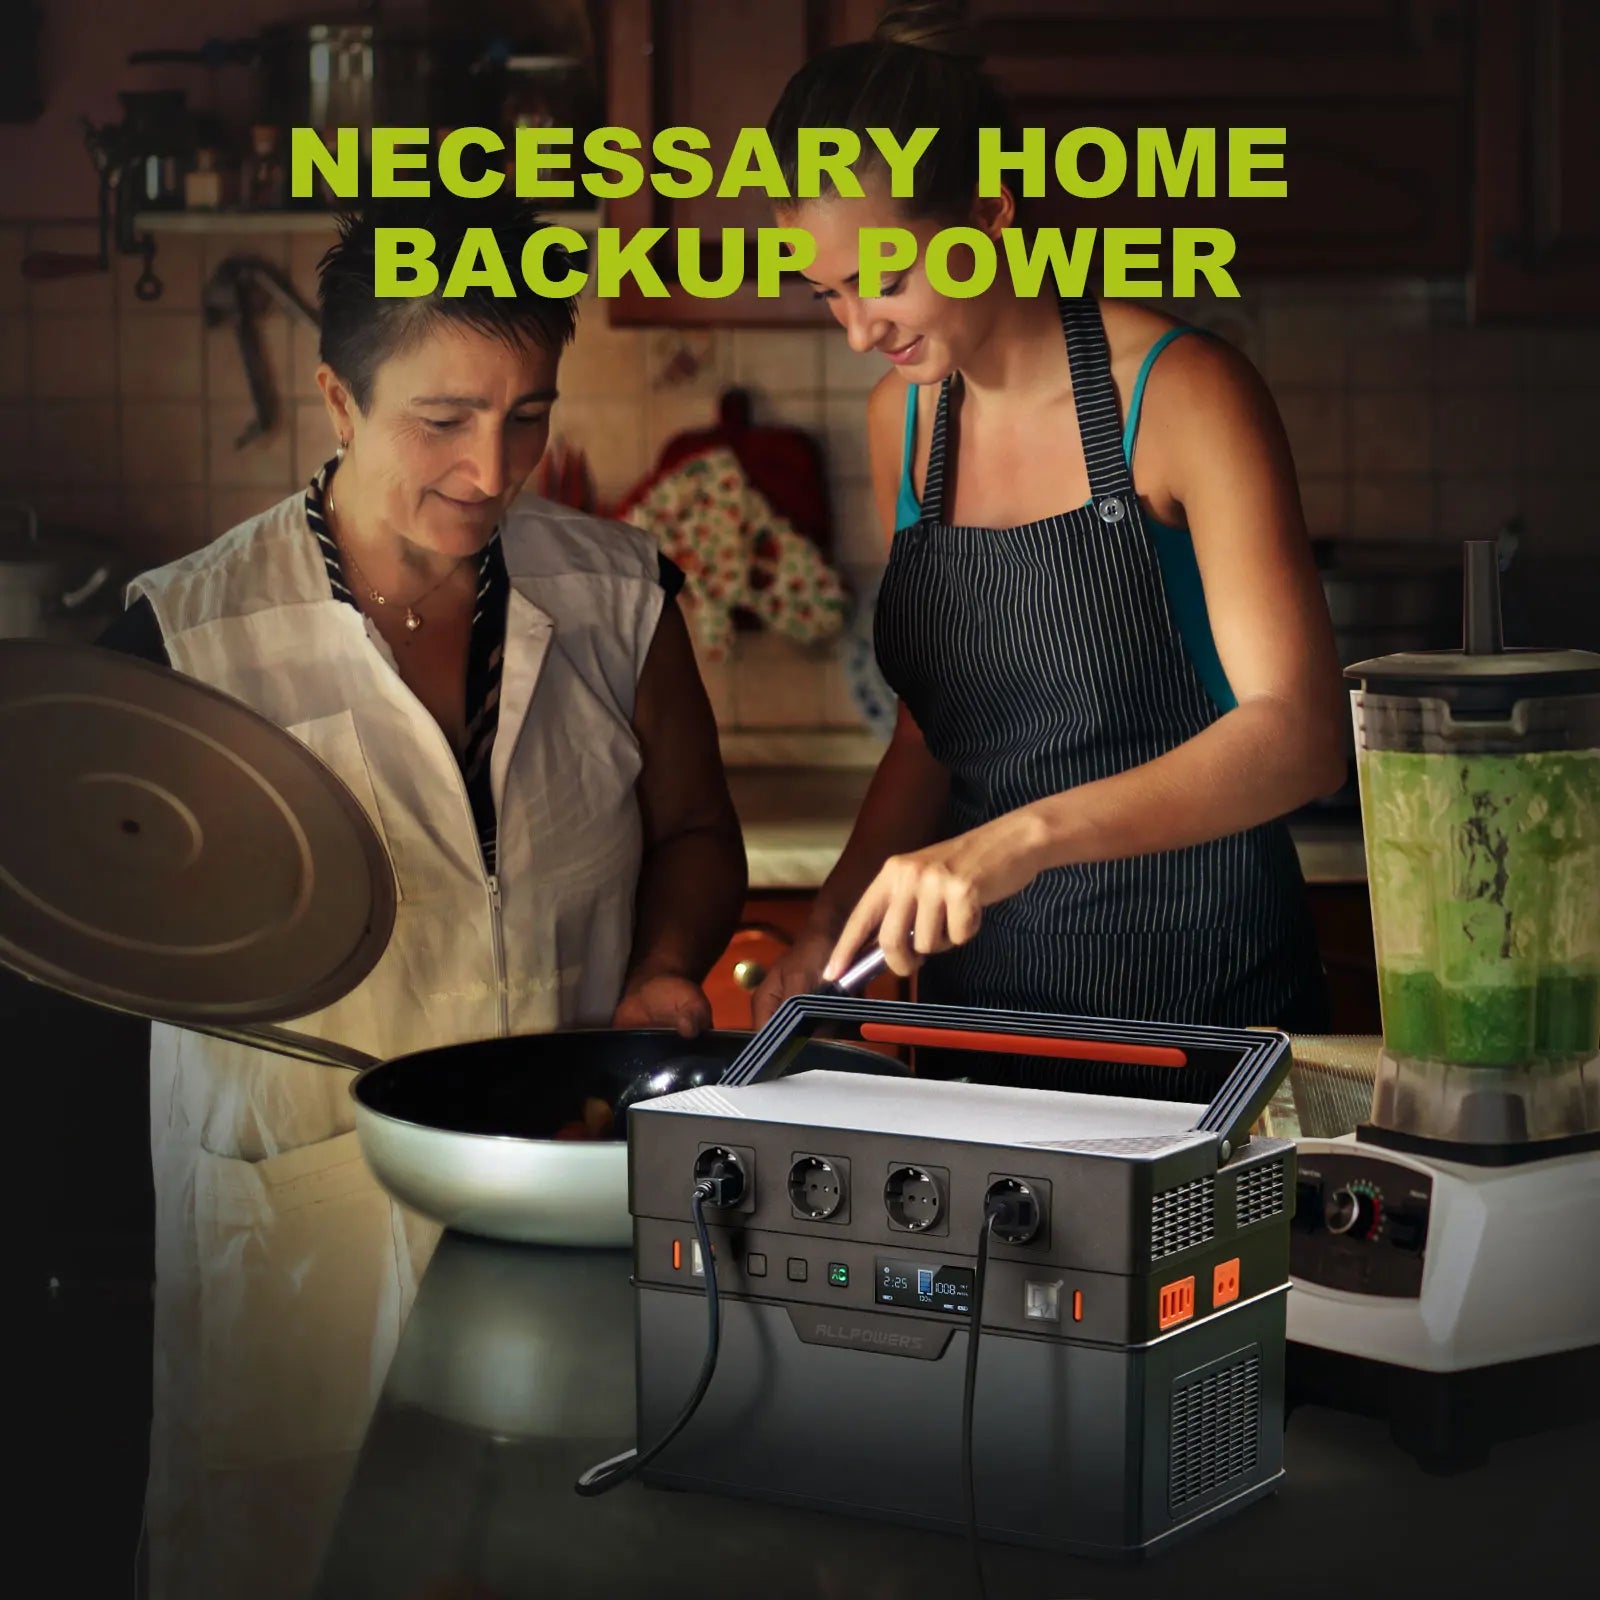 Portable power station for homes or camping, with 1500Wh capacity and 2400W output, rechargeable via solar panels.